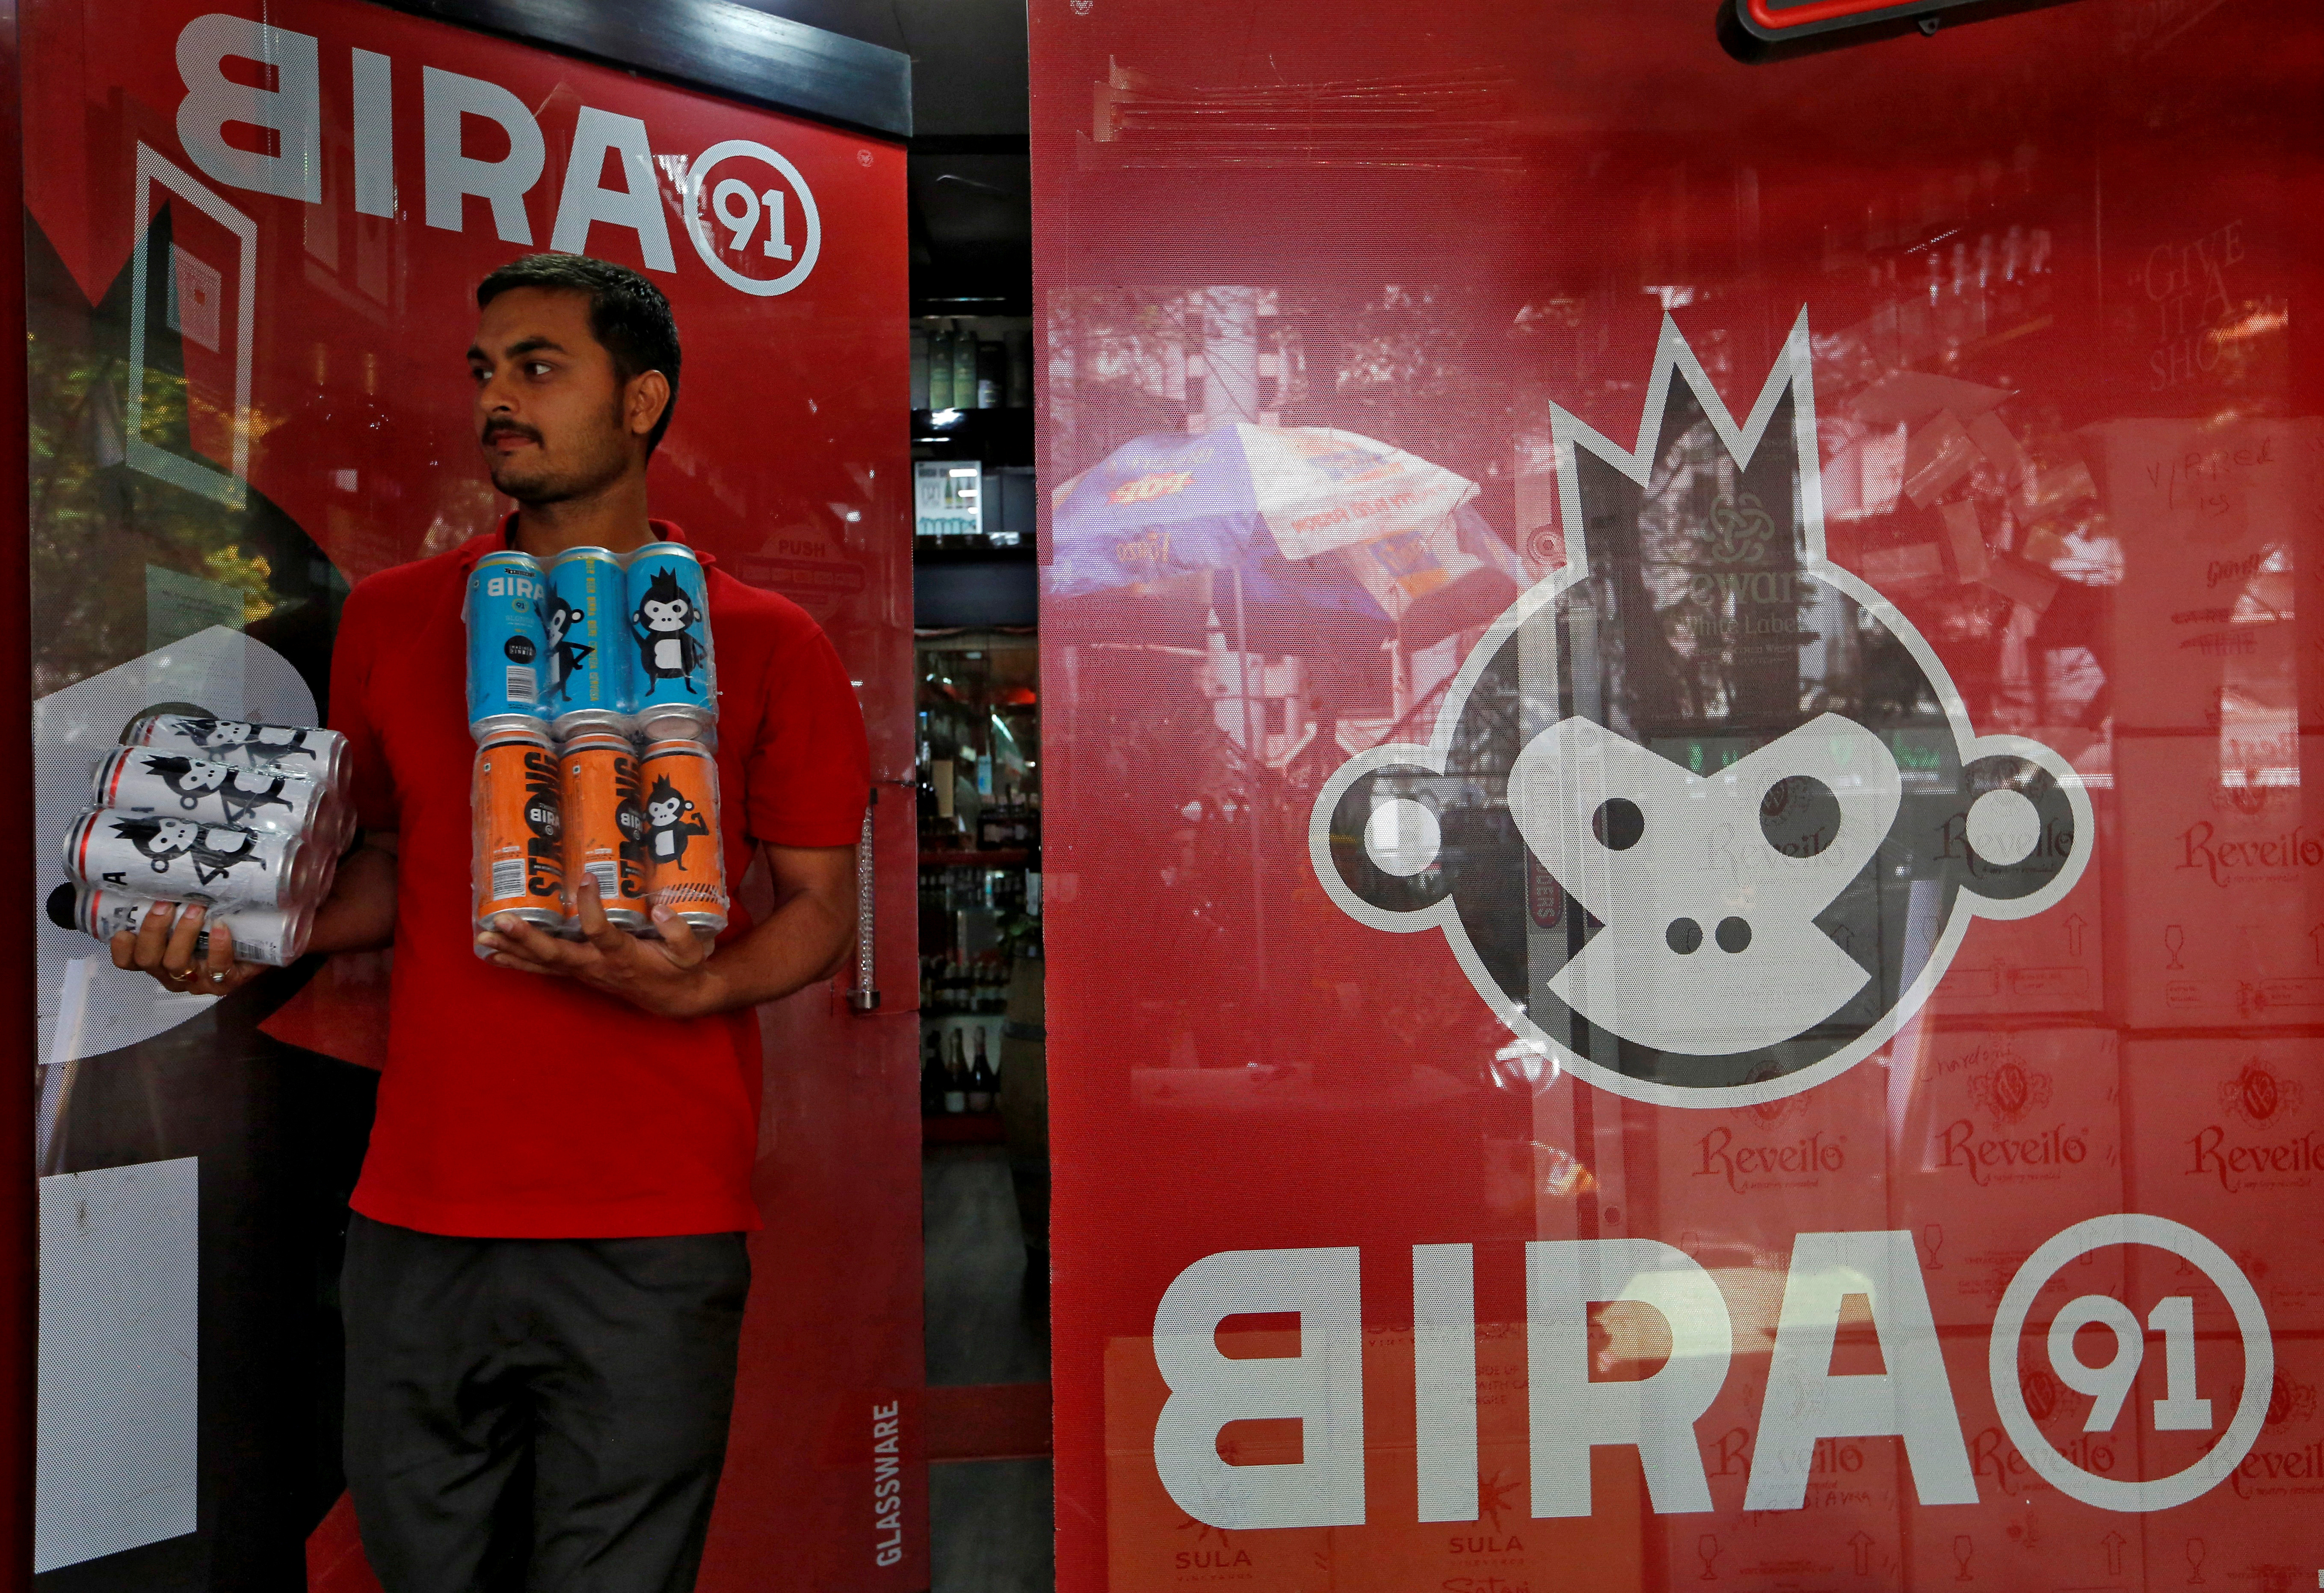 An employee carries Bira beer cans to deliver them to a customer at a liquor store in Mumbai